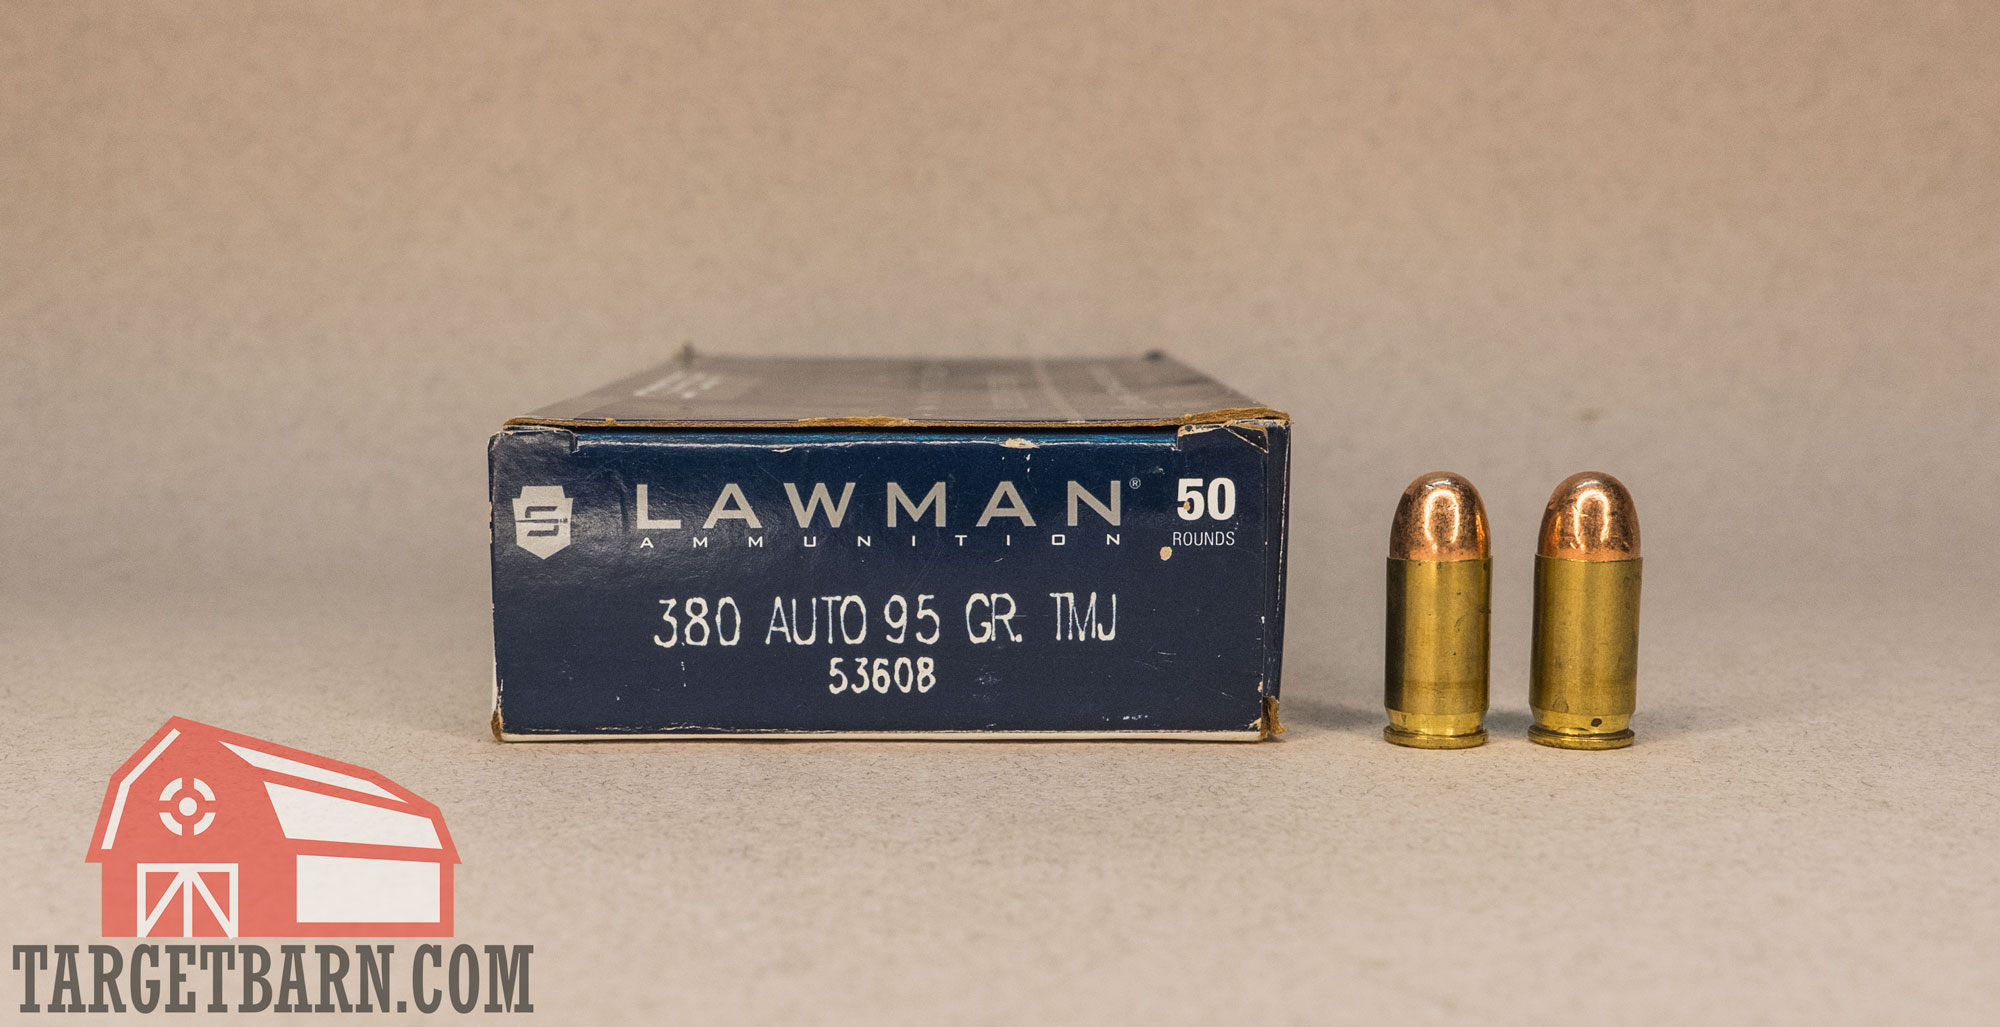 a box and two rounds of speer lawman 380 tmj ammo